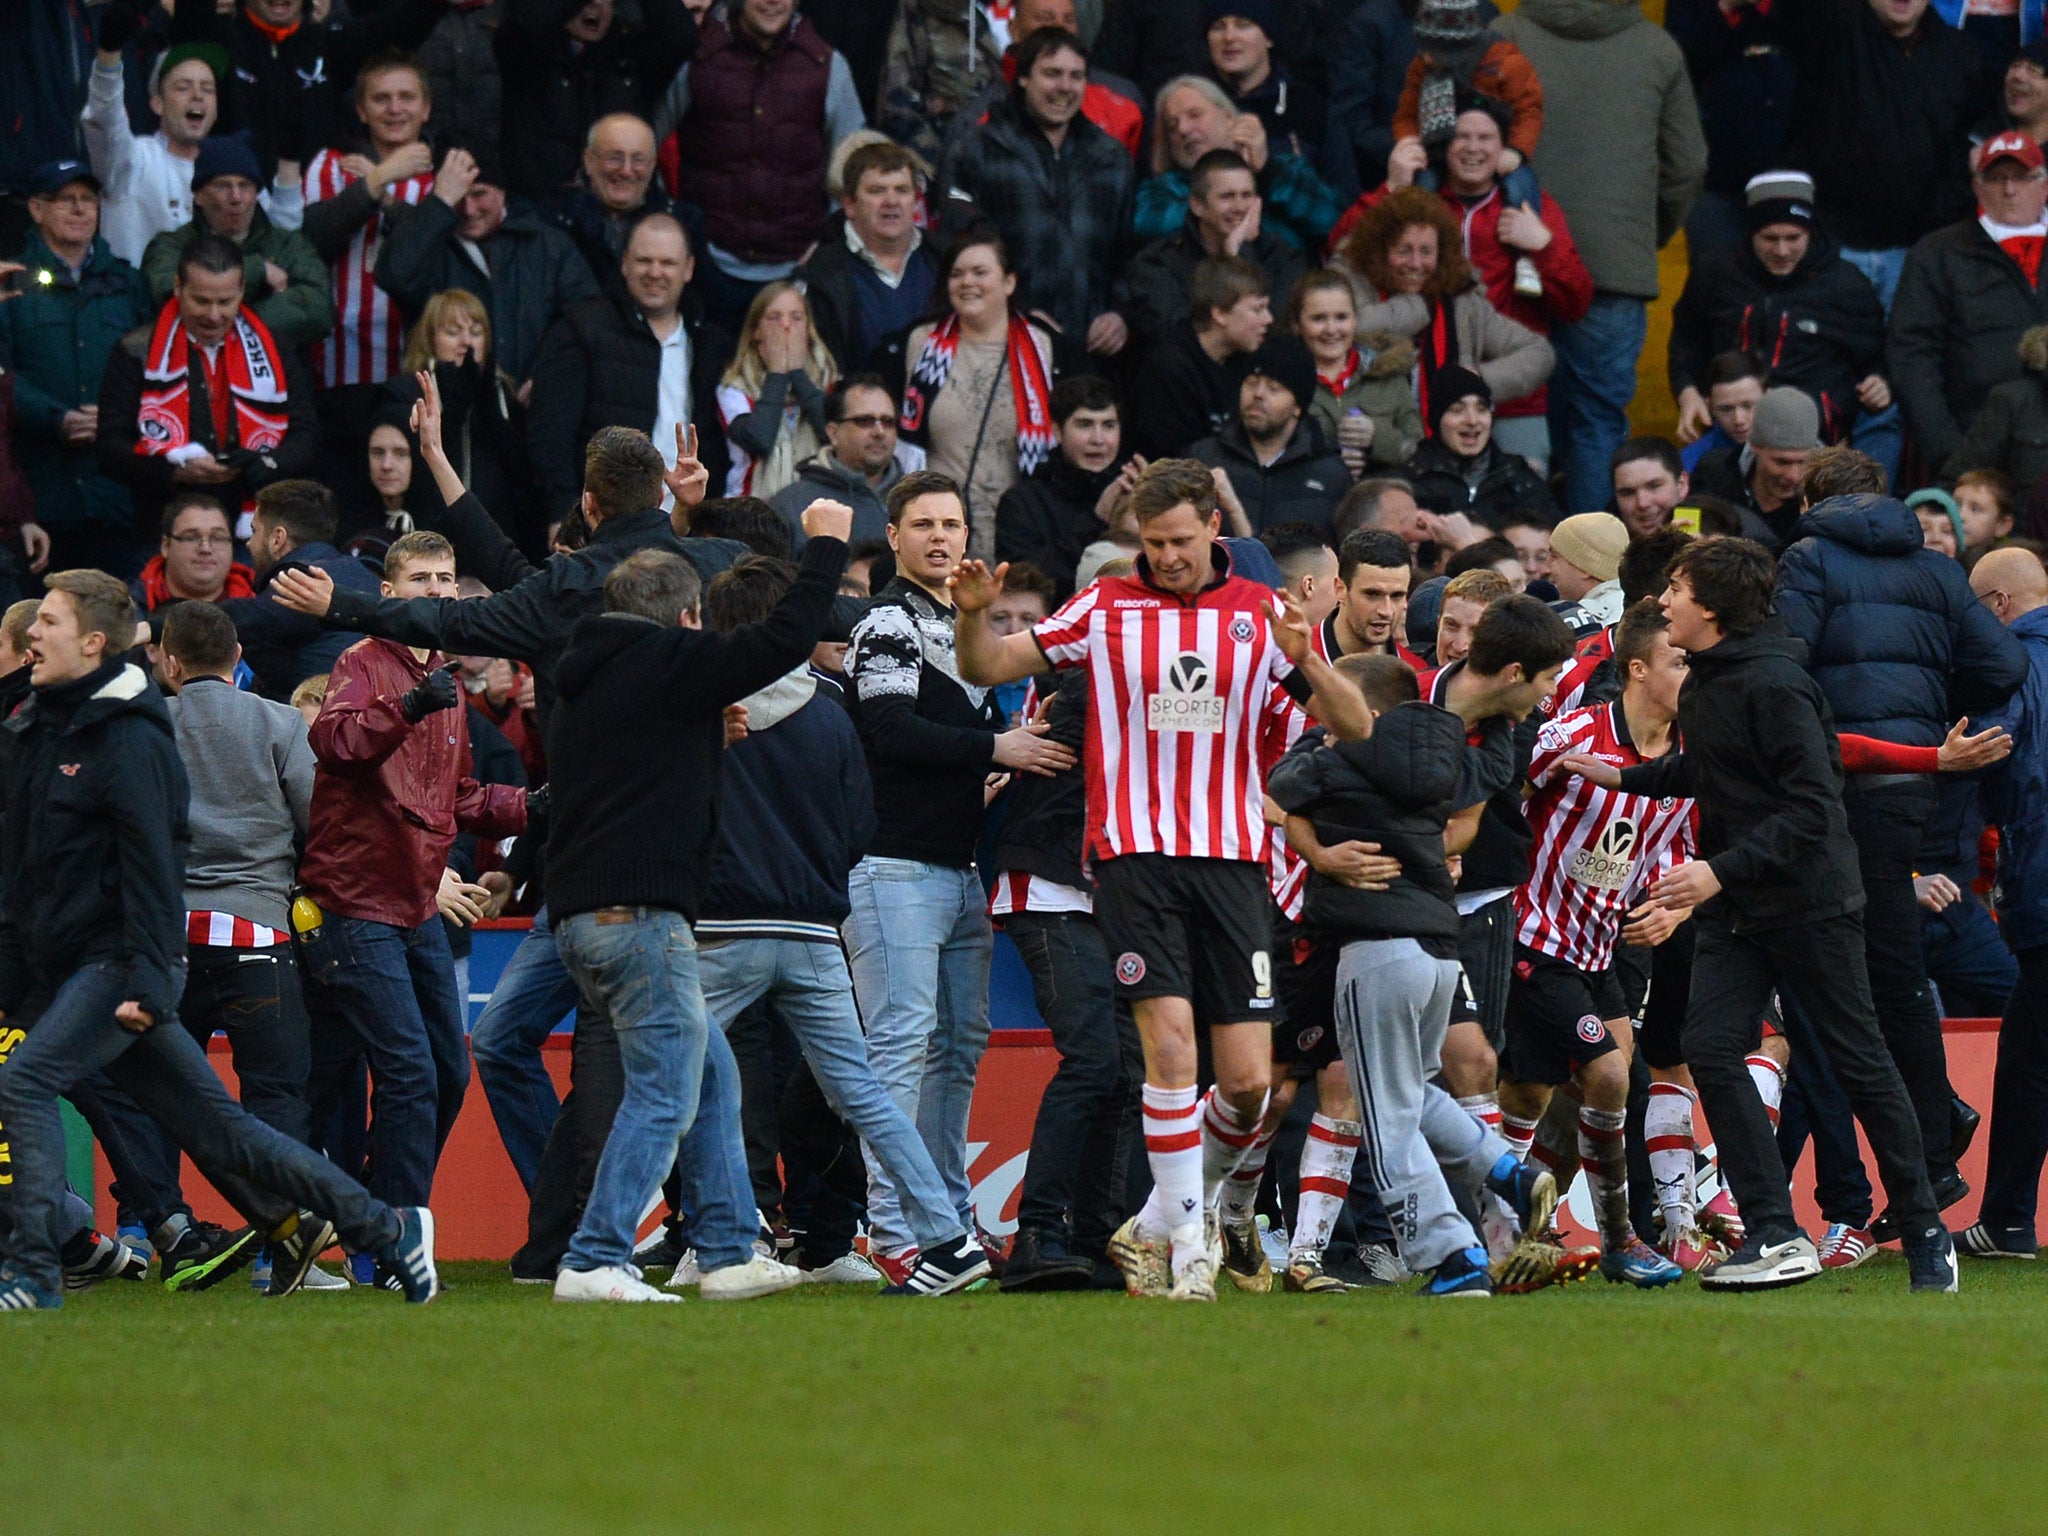 Sheffield United supporters invade the pitch after Sheffield United take a 3-1 lead over Nottingham Forest to reacg the FA Cup quarter-finals